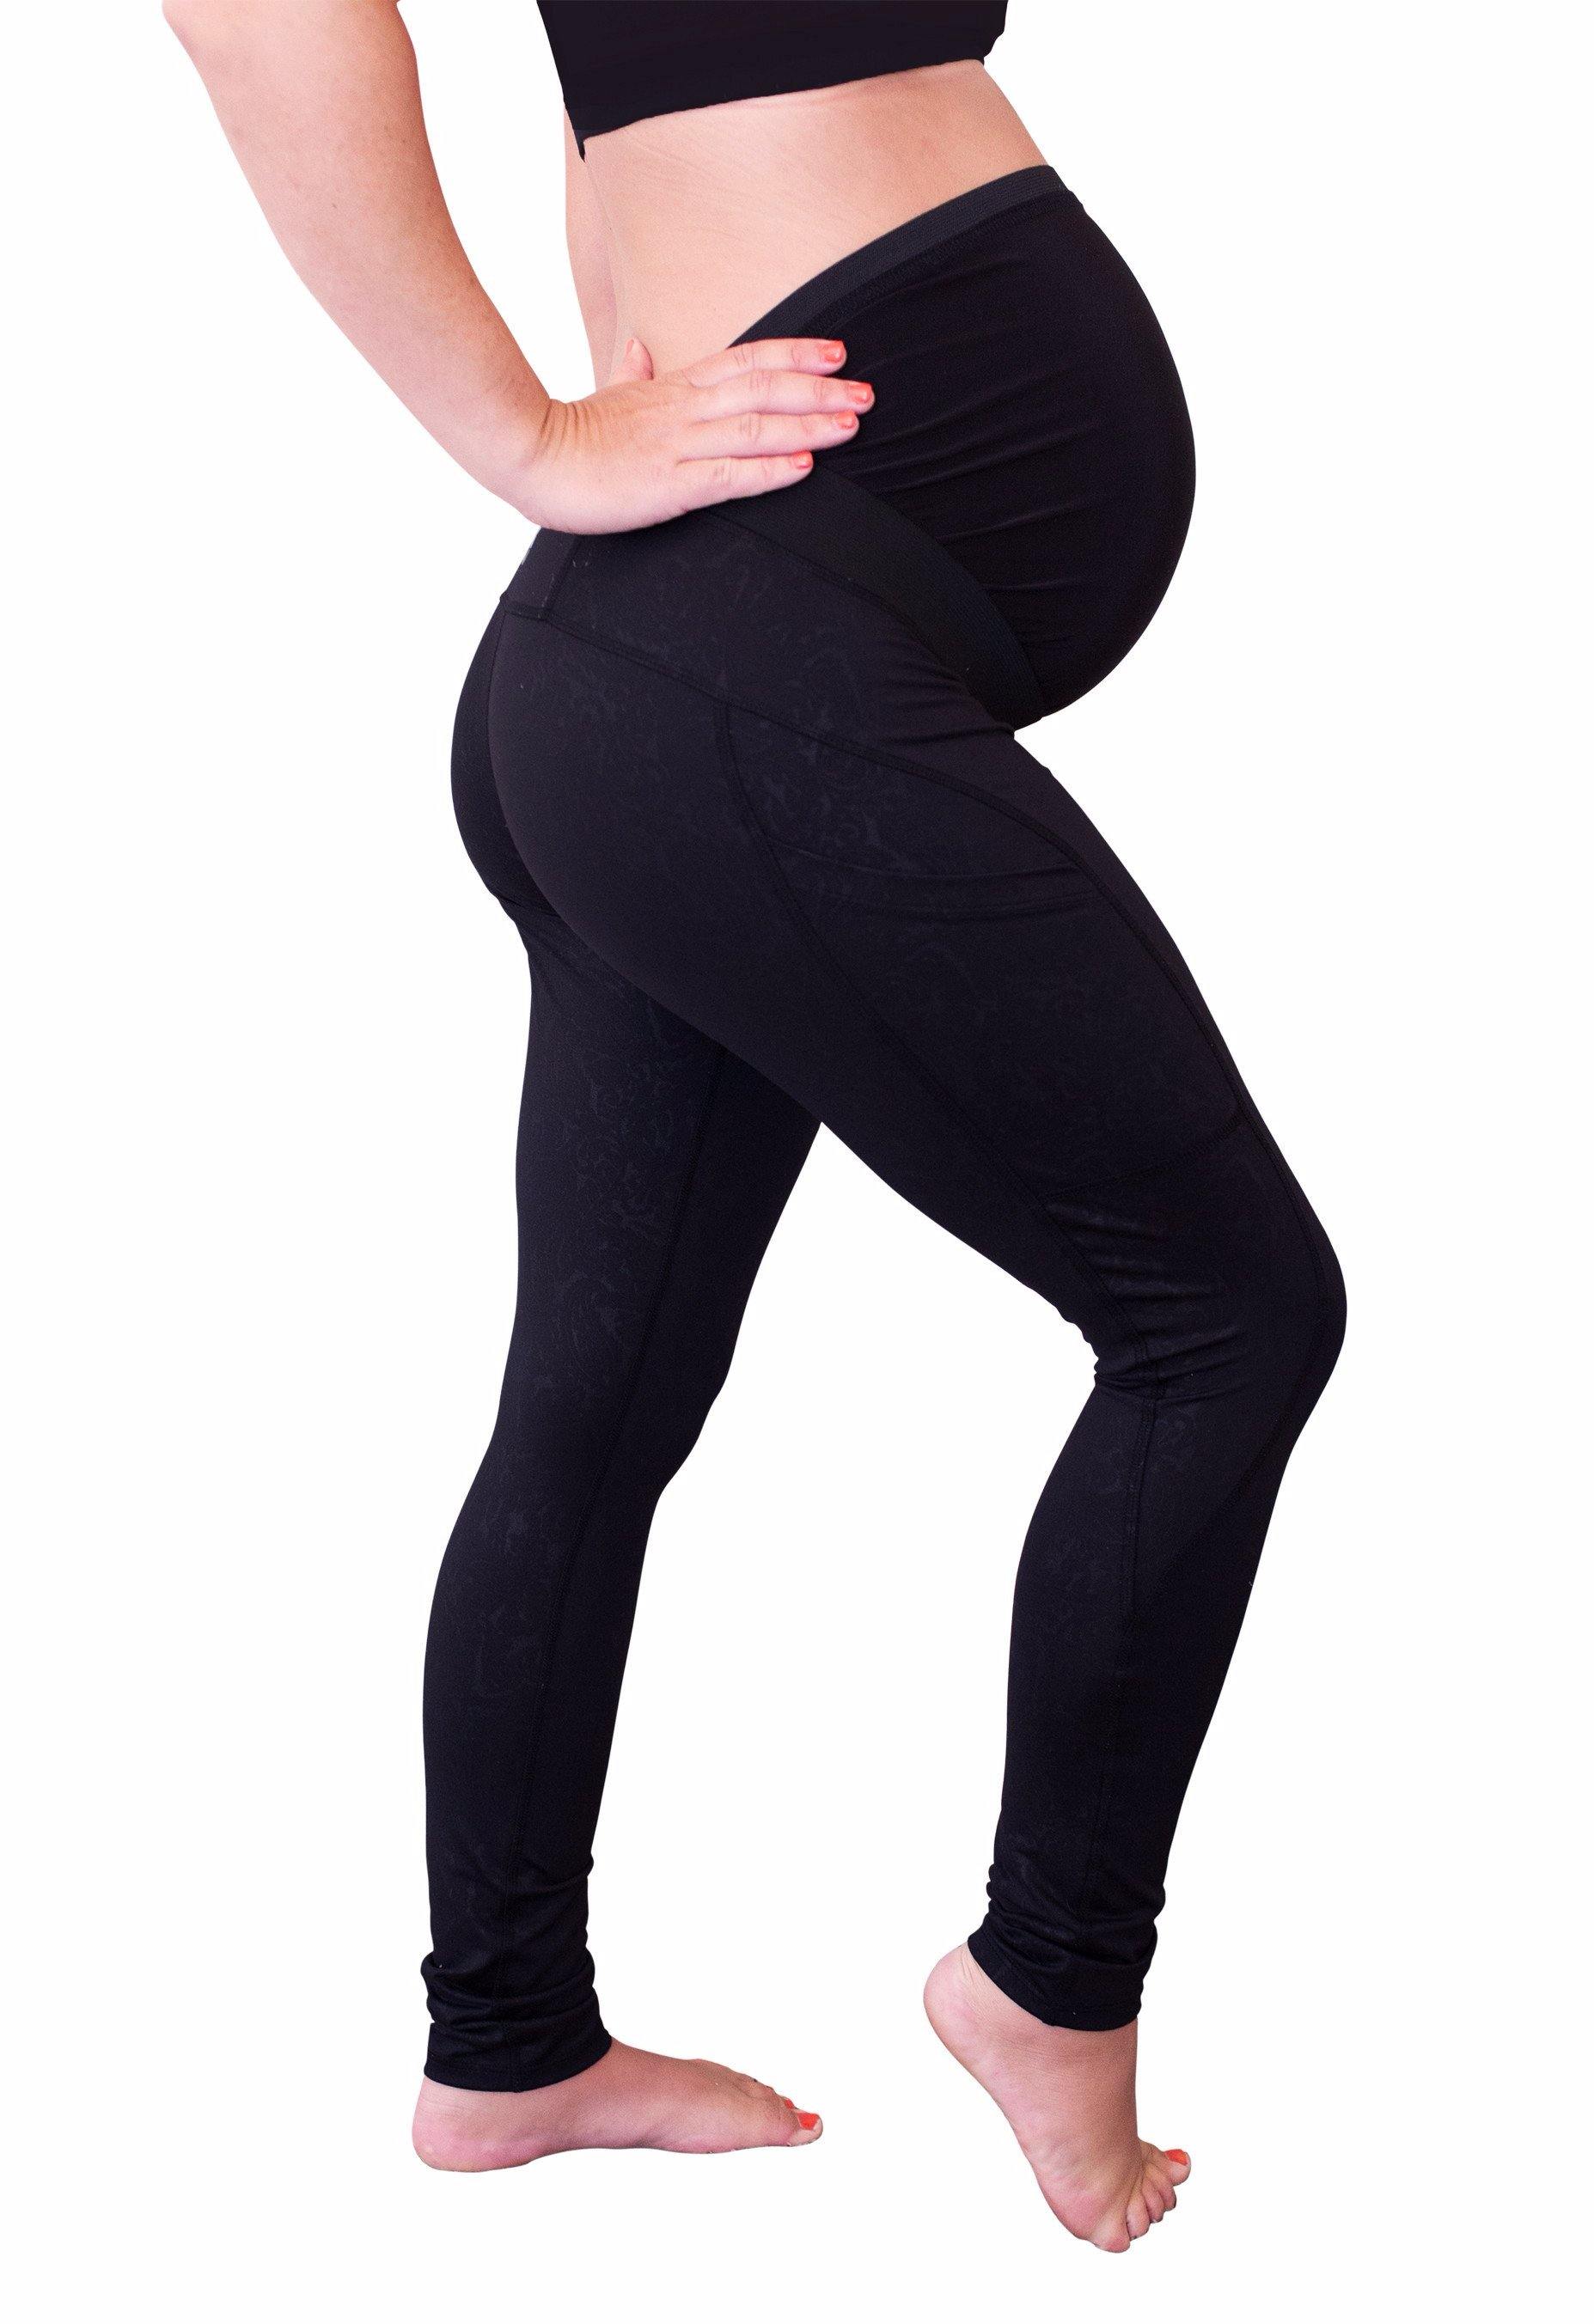  FaroLy Women's Maternity Workout Leggings Comfortable Stretch  Over Belly Bump Full Length Running Active Yoga Pants (Color : Black, Size  : Medium) : Clothing, Shoes & Jewelry